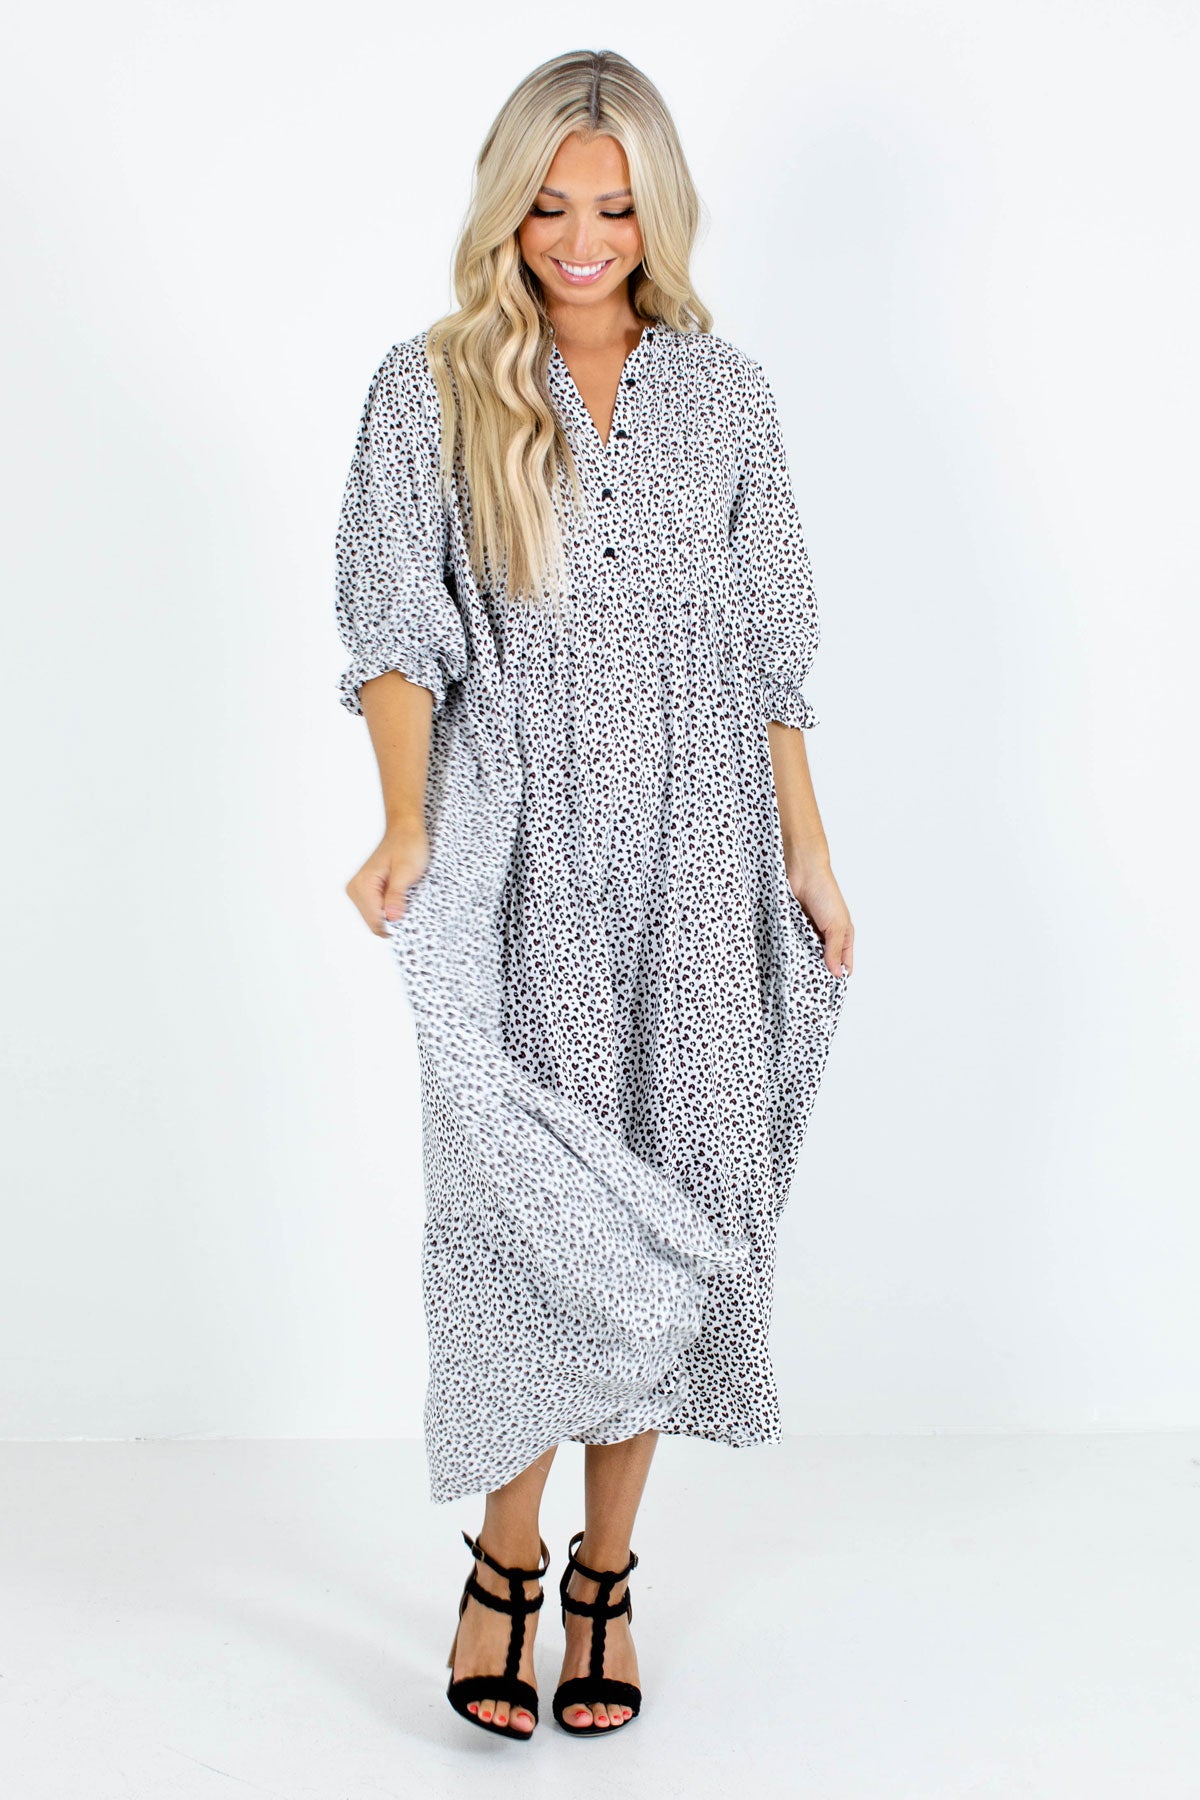 White Lightweight Material Boutique Maxi Dress